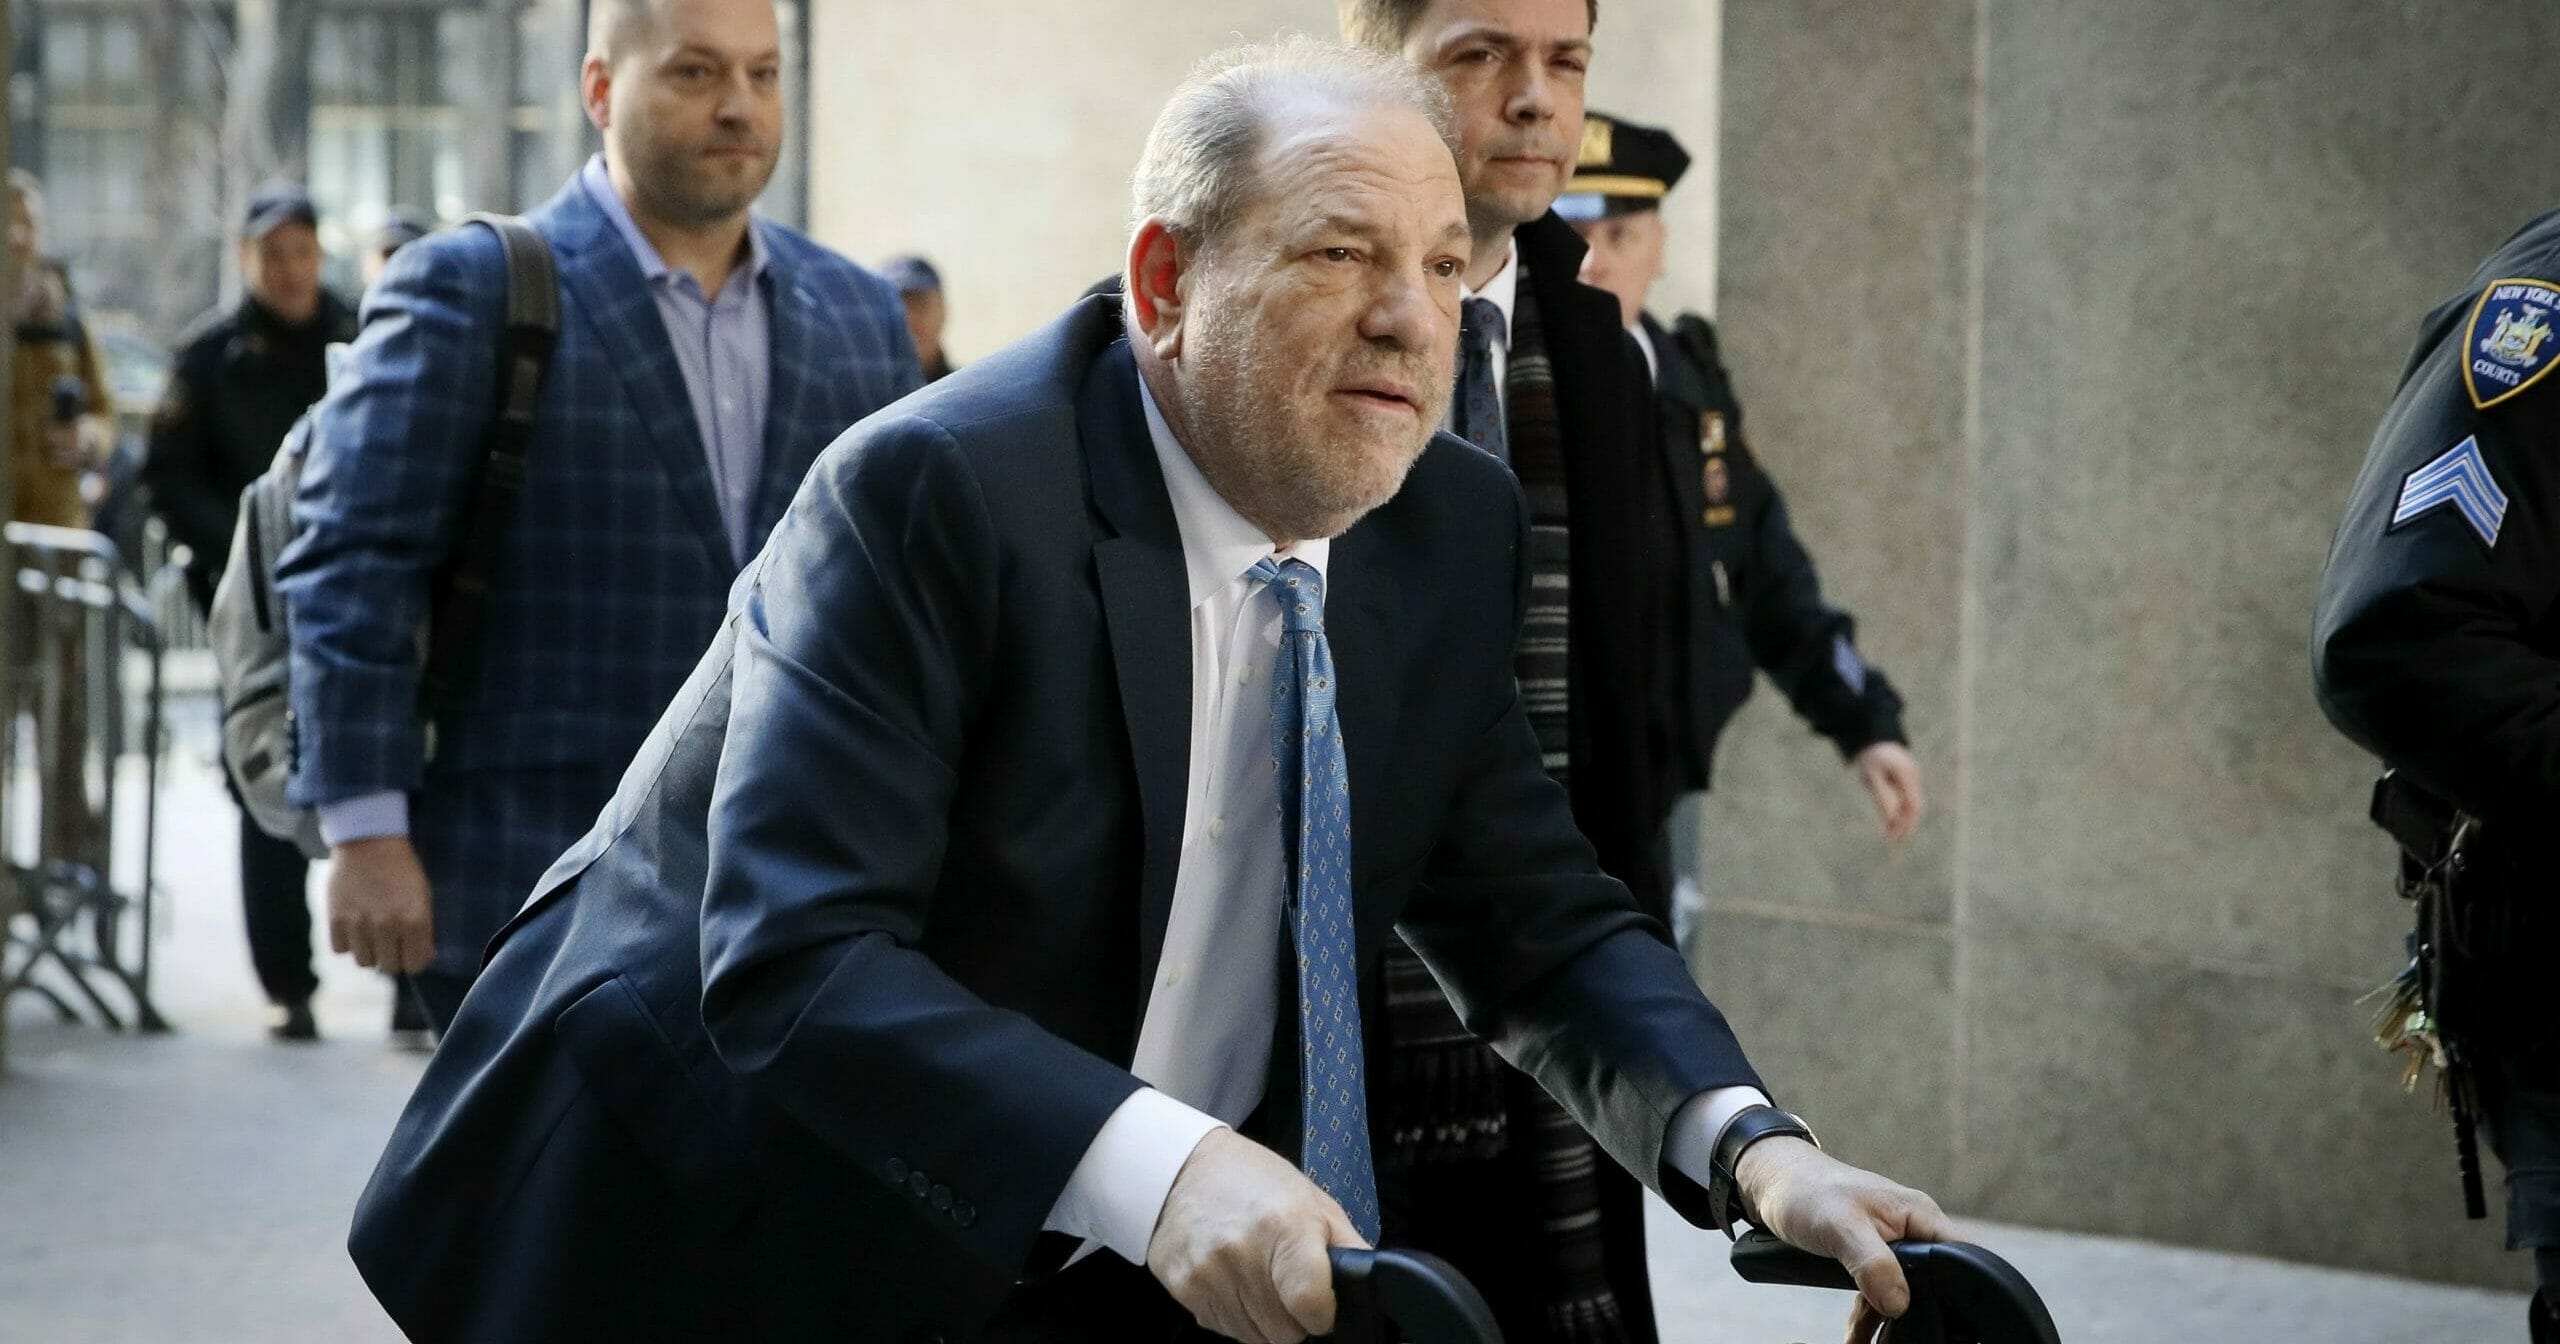 Harvey Weinstein arrives at a Manhattan courthouse as jury deliberations continue in his rape trial on Feb. 24, 2020, in New York.